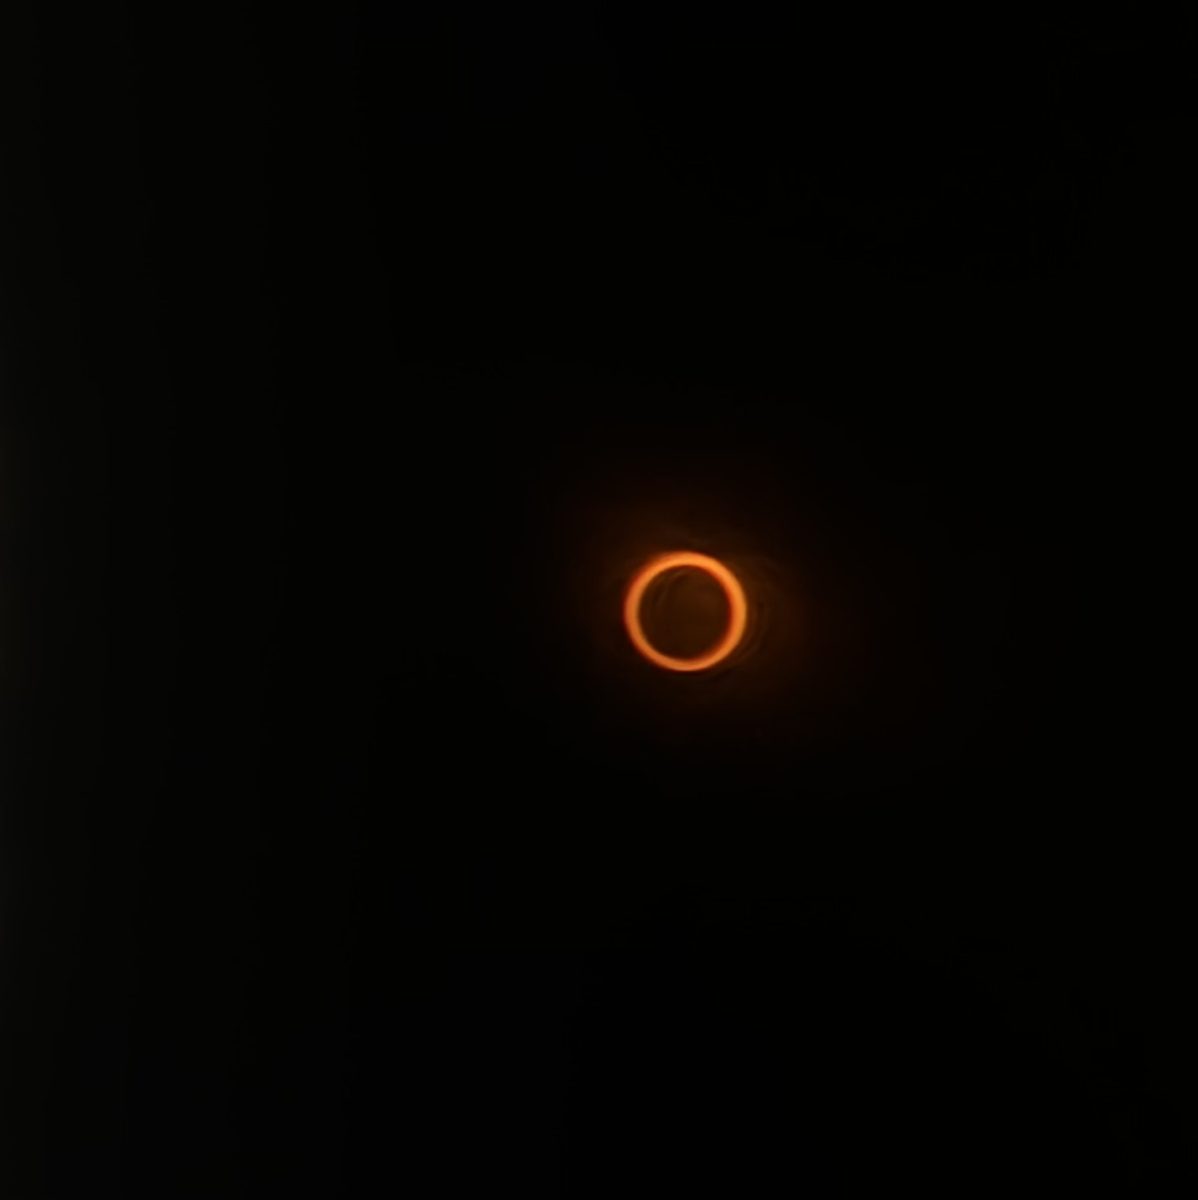 Photo of the October 2023 annular solar eclipse from Albuquerque, New Mexico on October 14, 2023 at about 10:36 local time. Taken on an iPhone 15 Pro Max through a solar filter.